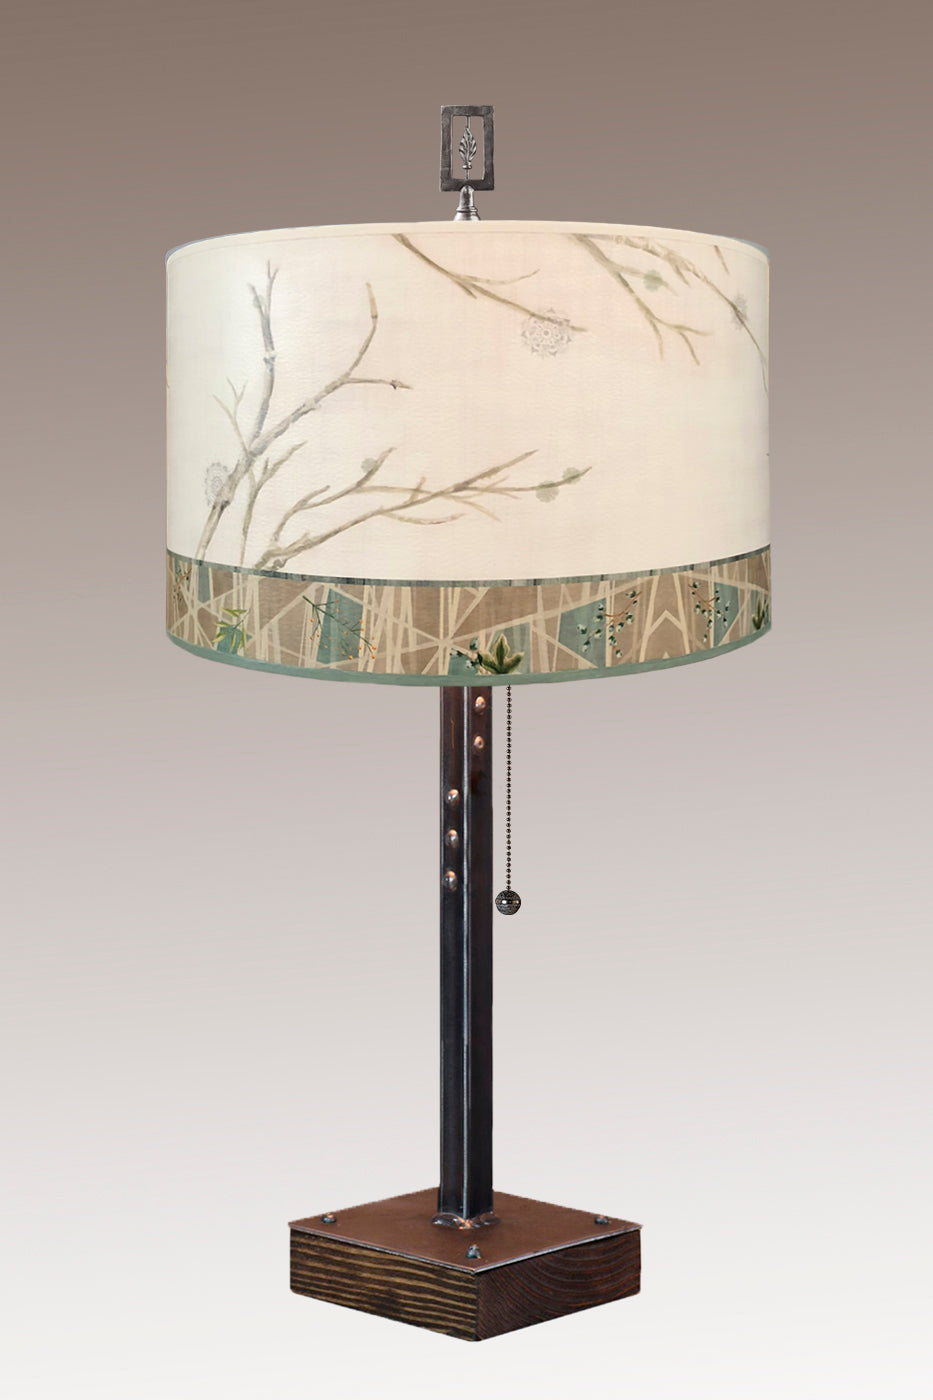 Janna Ugone &amp; Co Table Lamps Steel Table Lamp on Wood with Large Drum Shade in Prism Branch